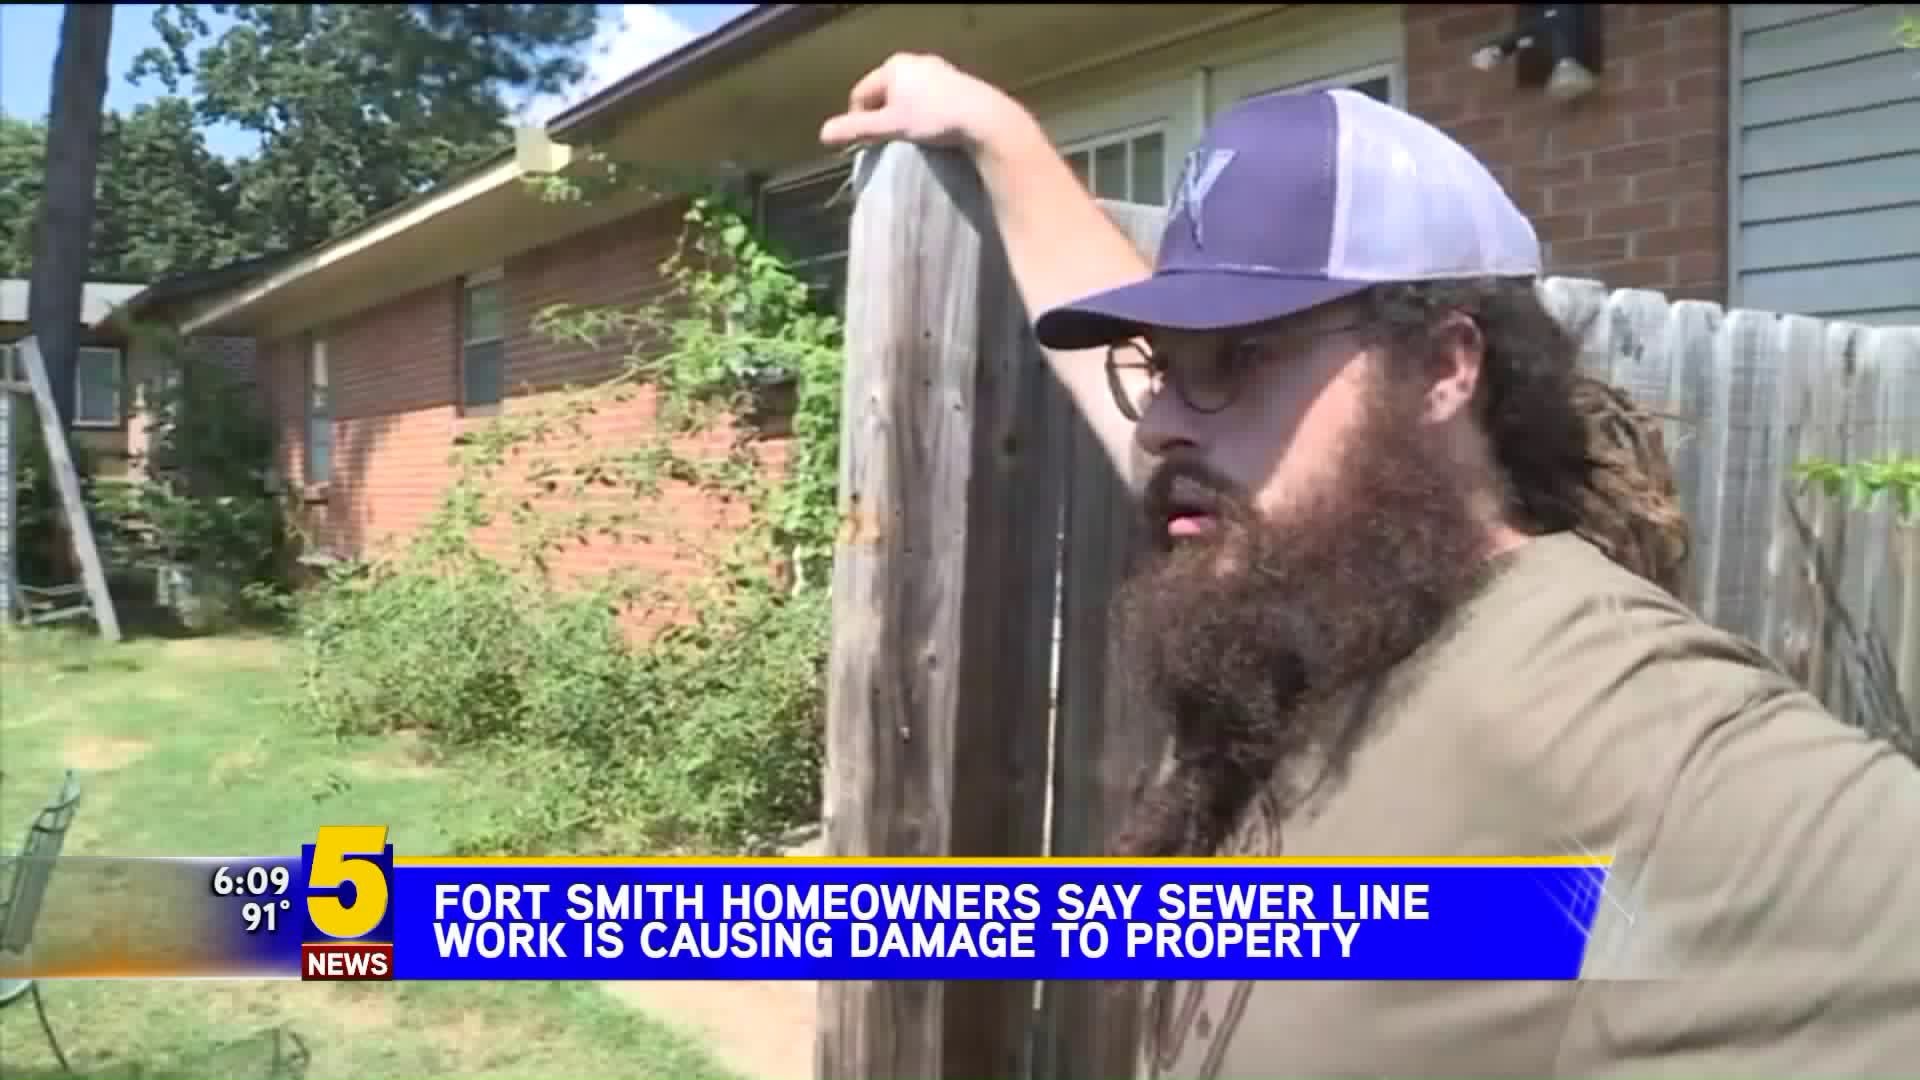 Fort Smith Homeowners Say Sewer Line Work Is Causing Damage To Property